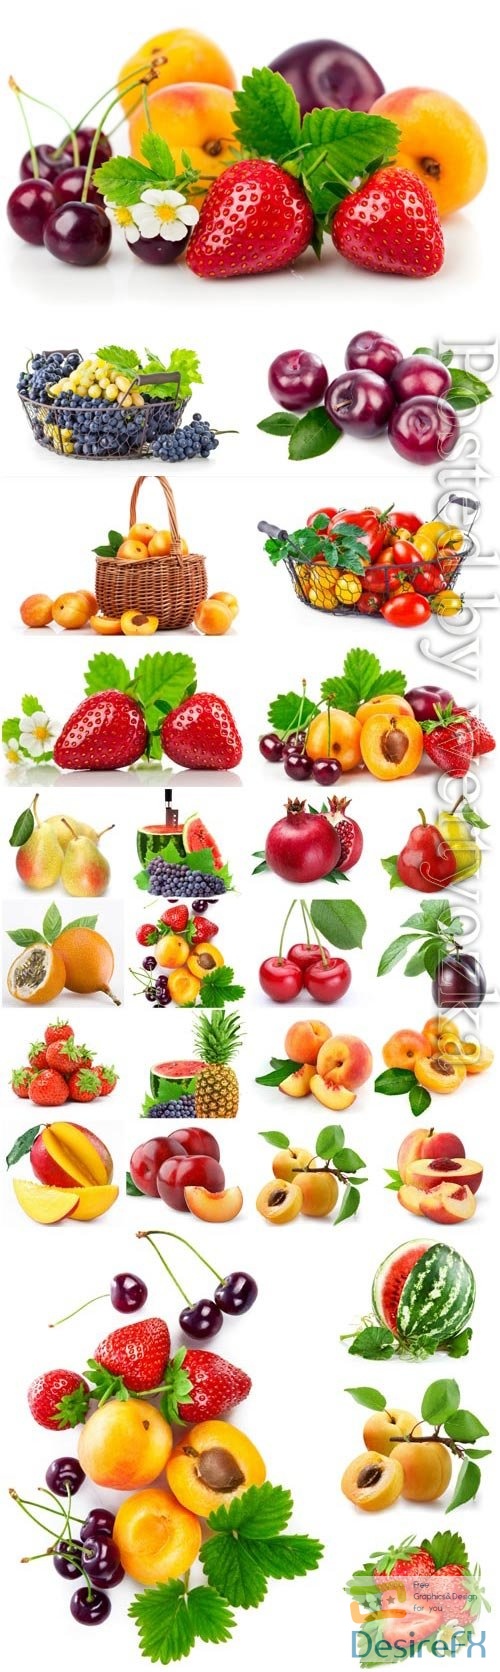 Set of fresh berries and fruits stock photo